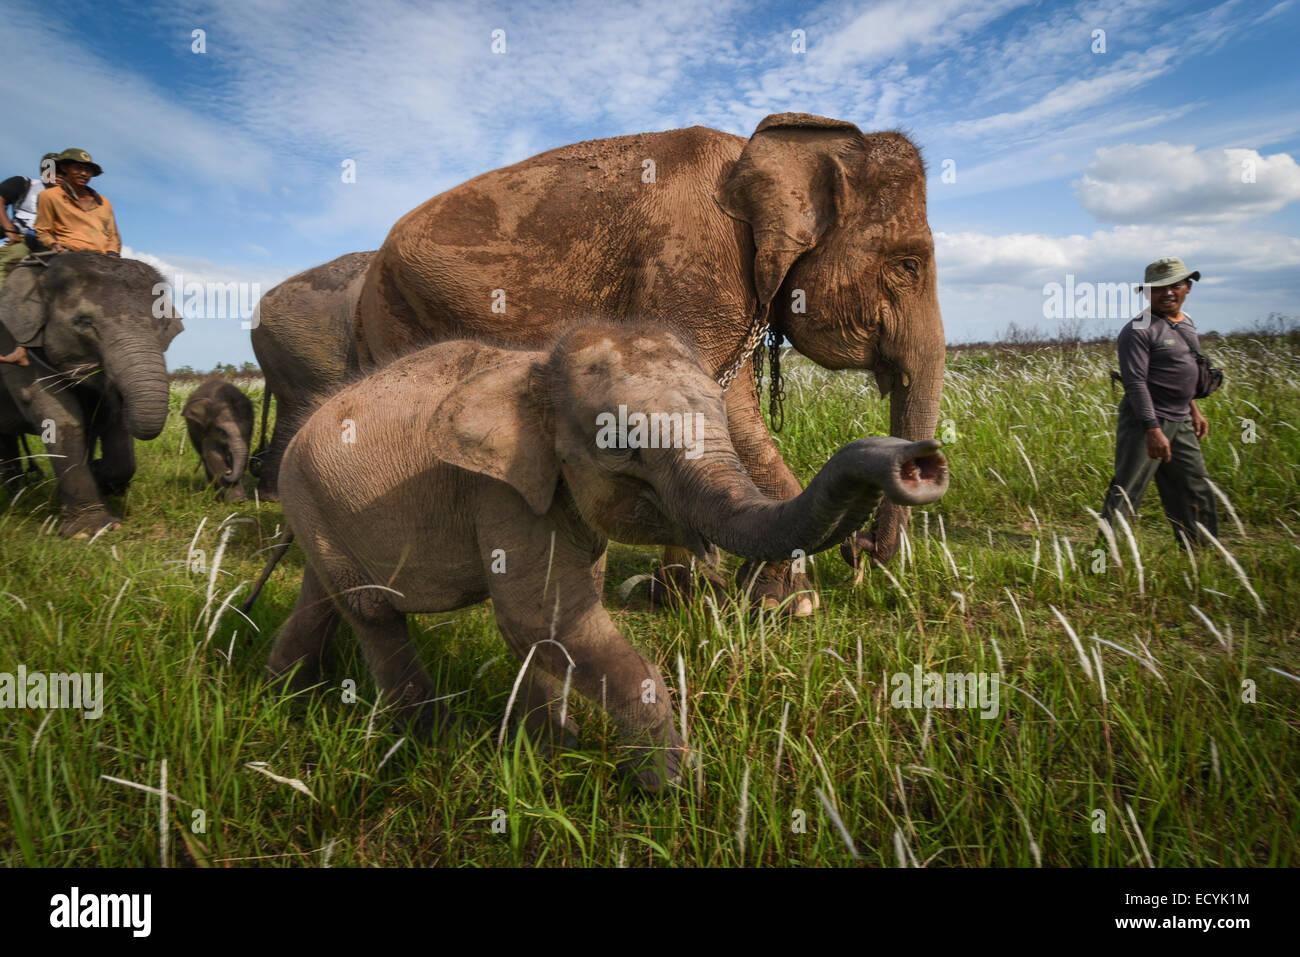 A baby elephant named Amel tries to kiss photographer's lens in Way Kambas National Park, Indonesia. Stock Photo